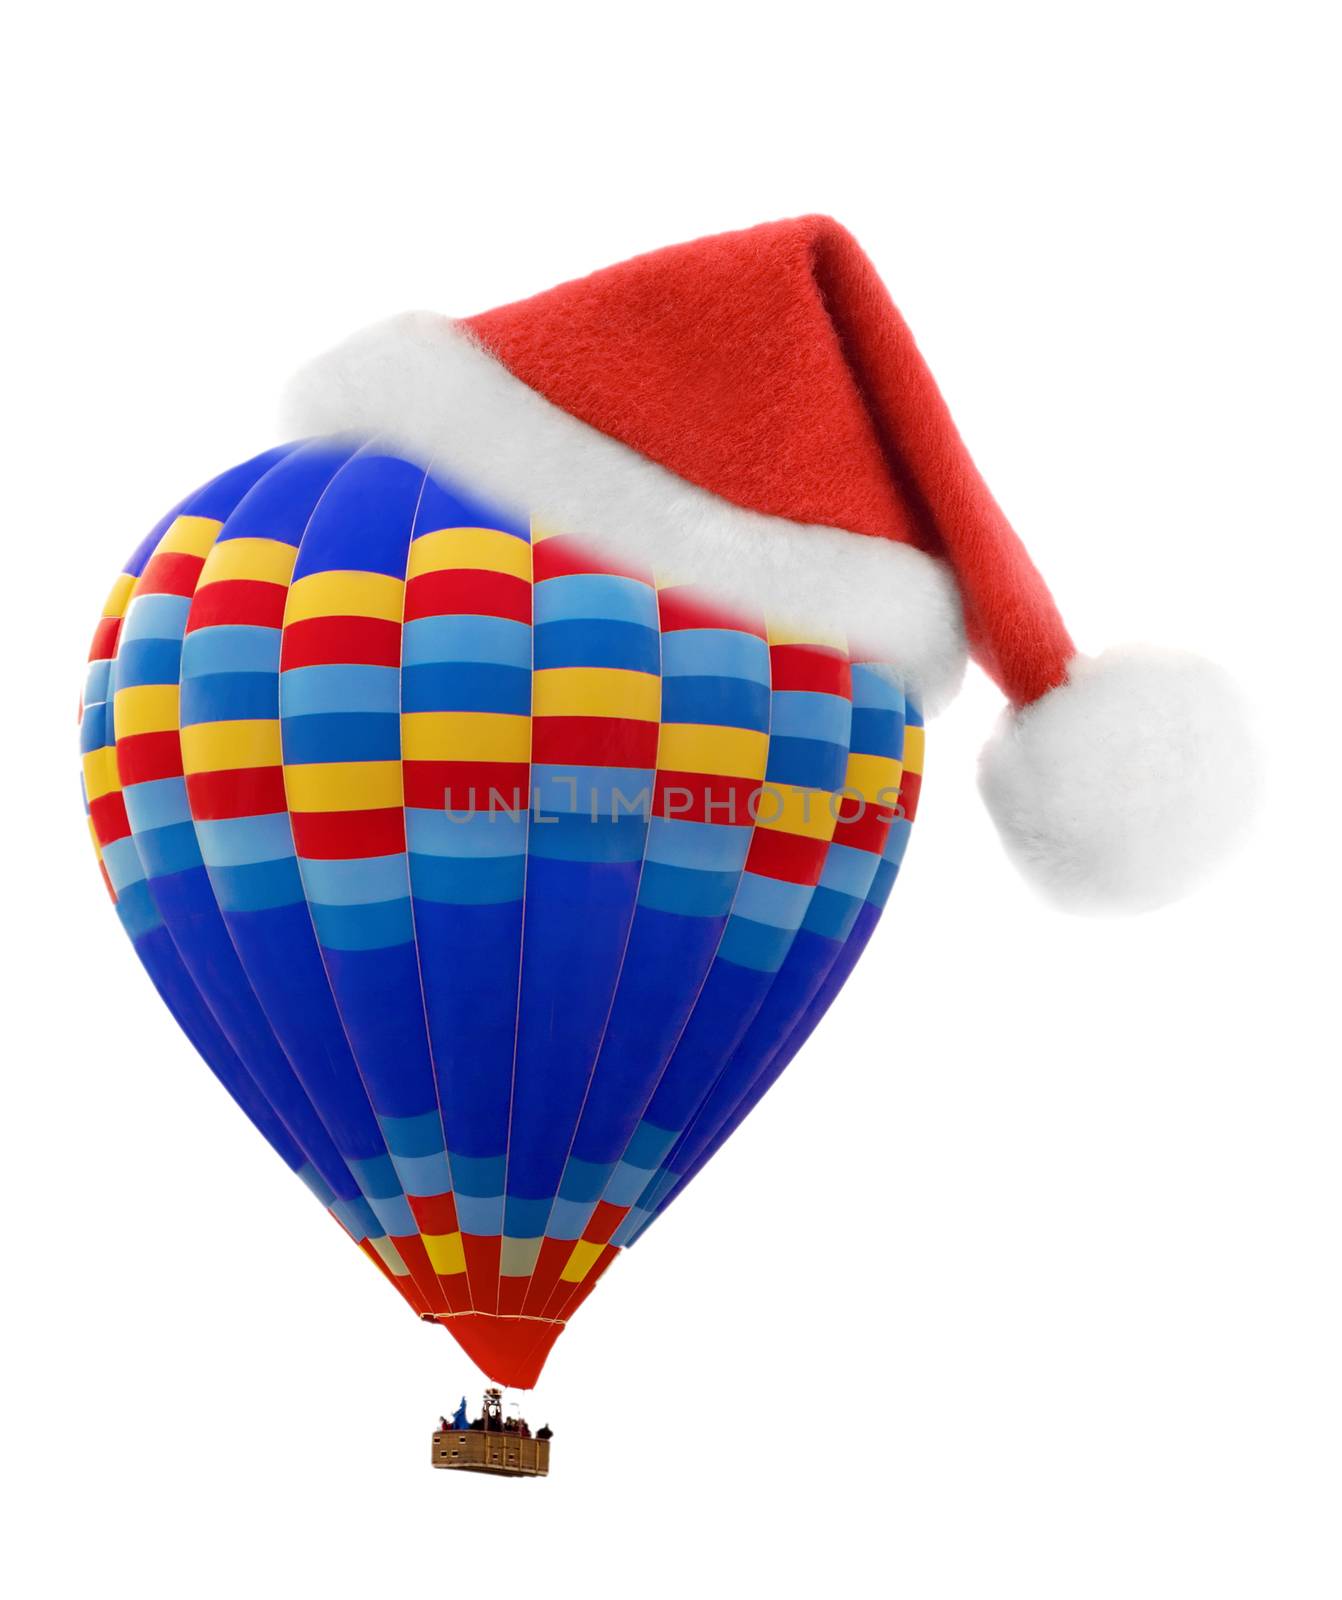 Santa hat on Hot air balloon isolated on white background